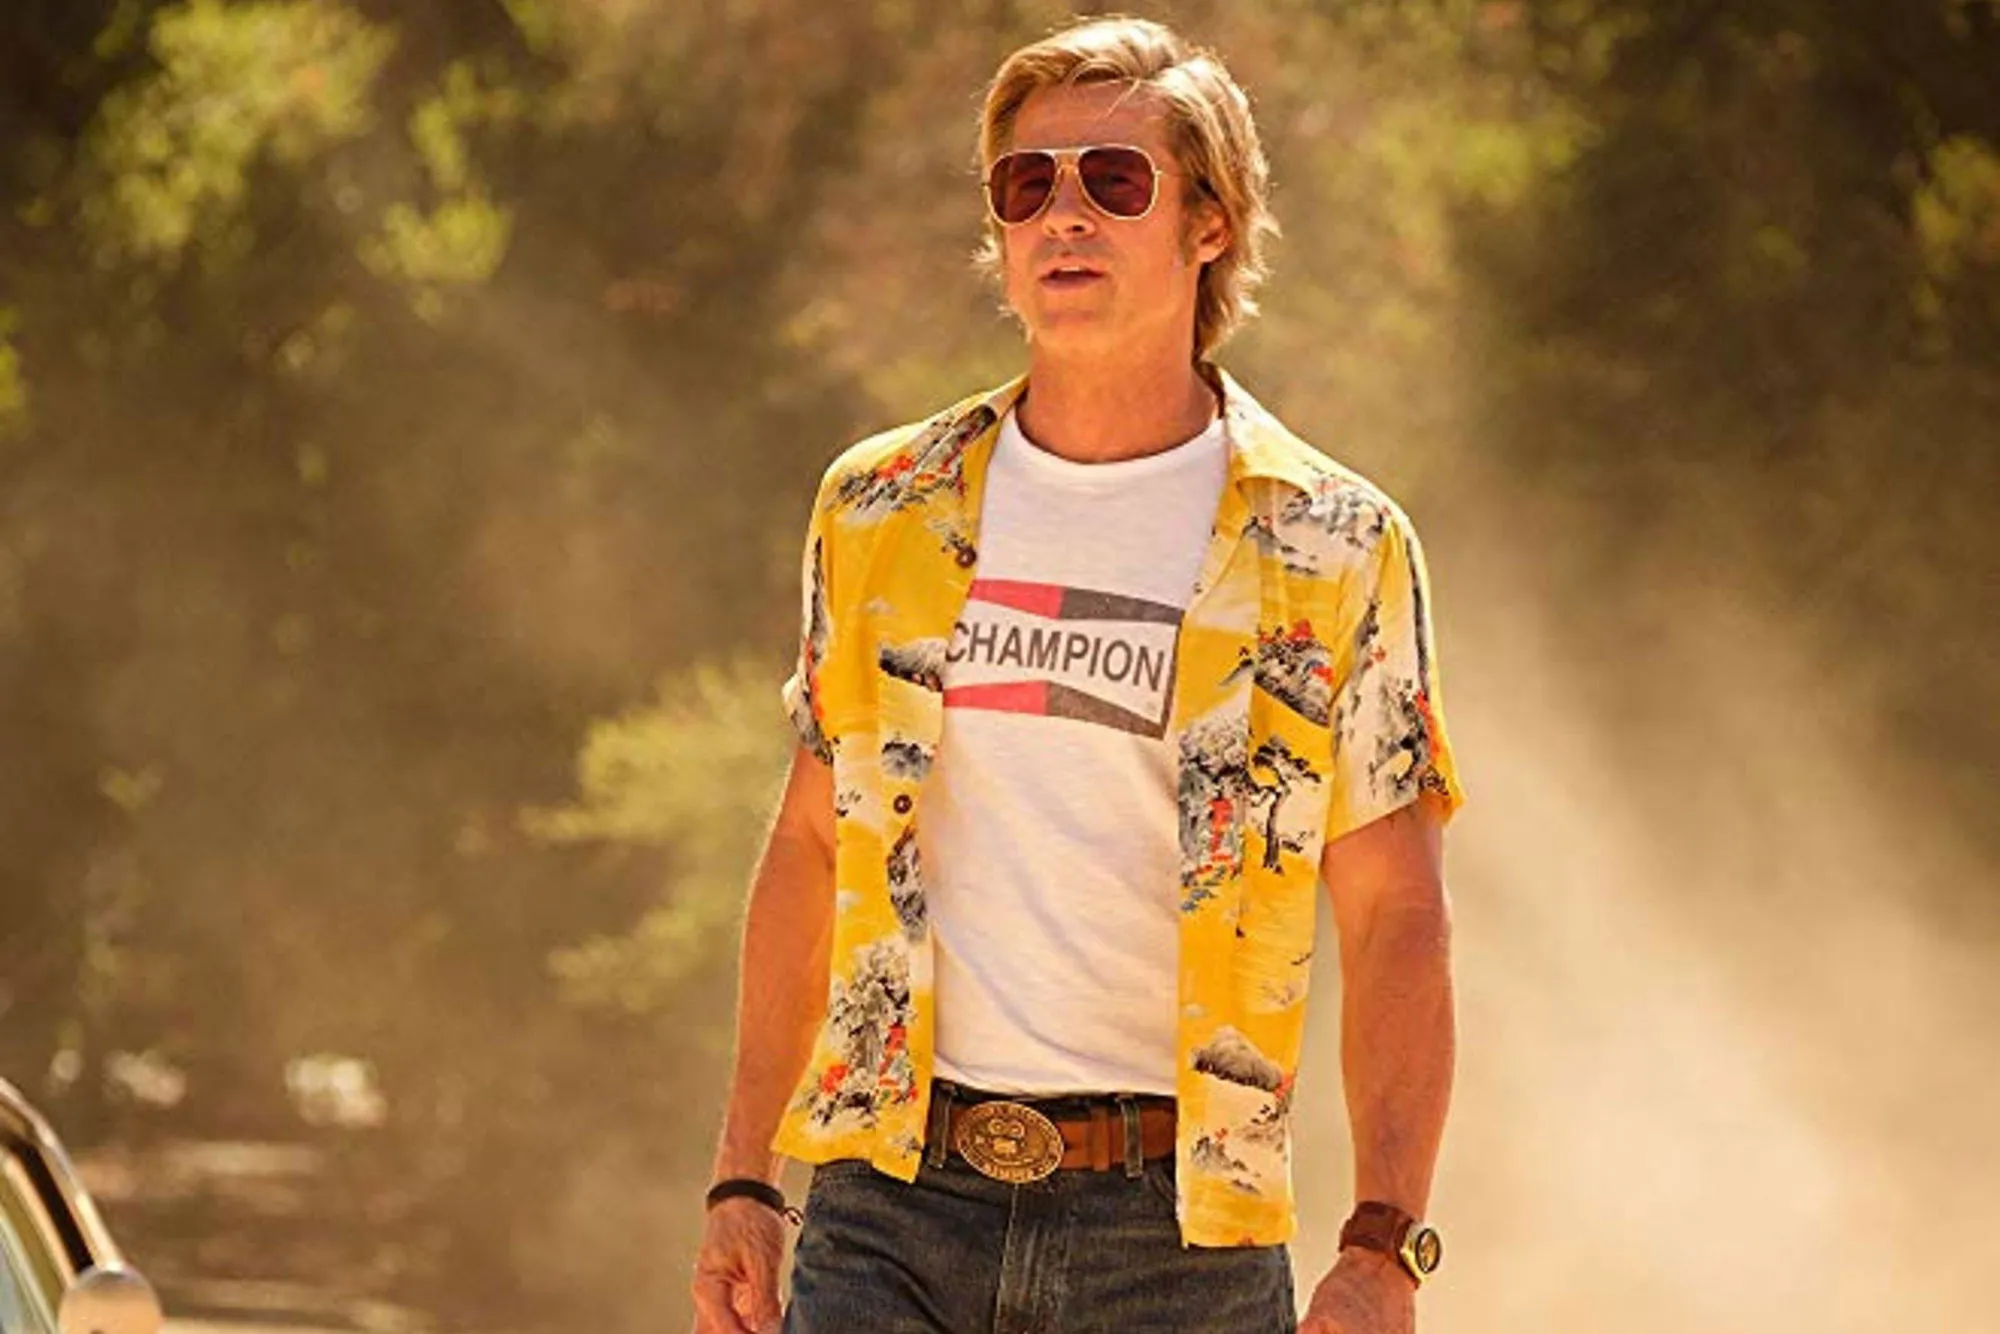 What is so Special about Brad Pitt's Acting in "Once Upon a Time in Hollywood"?